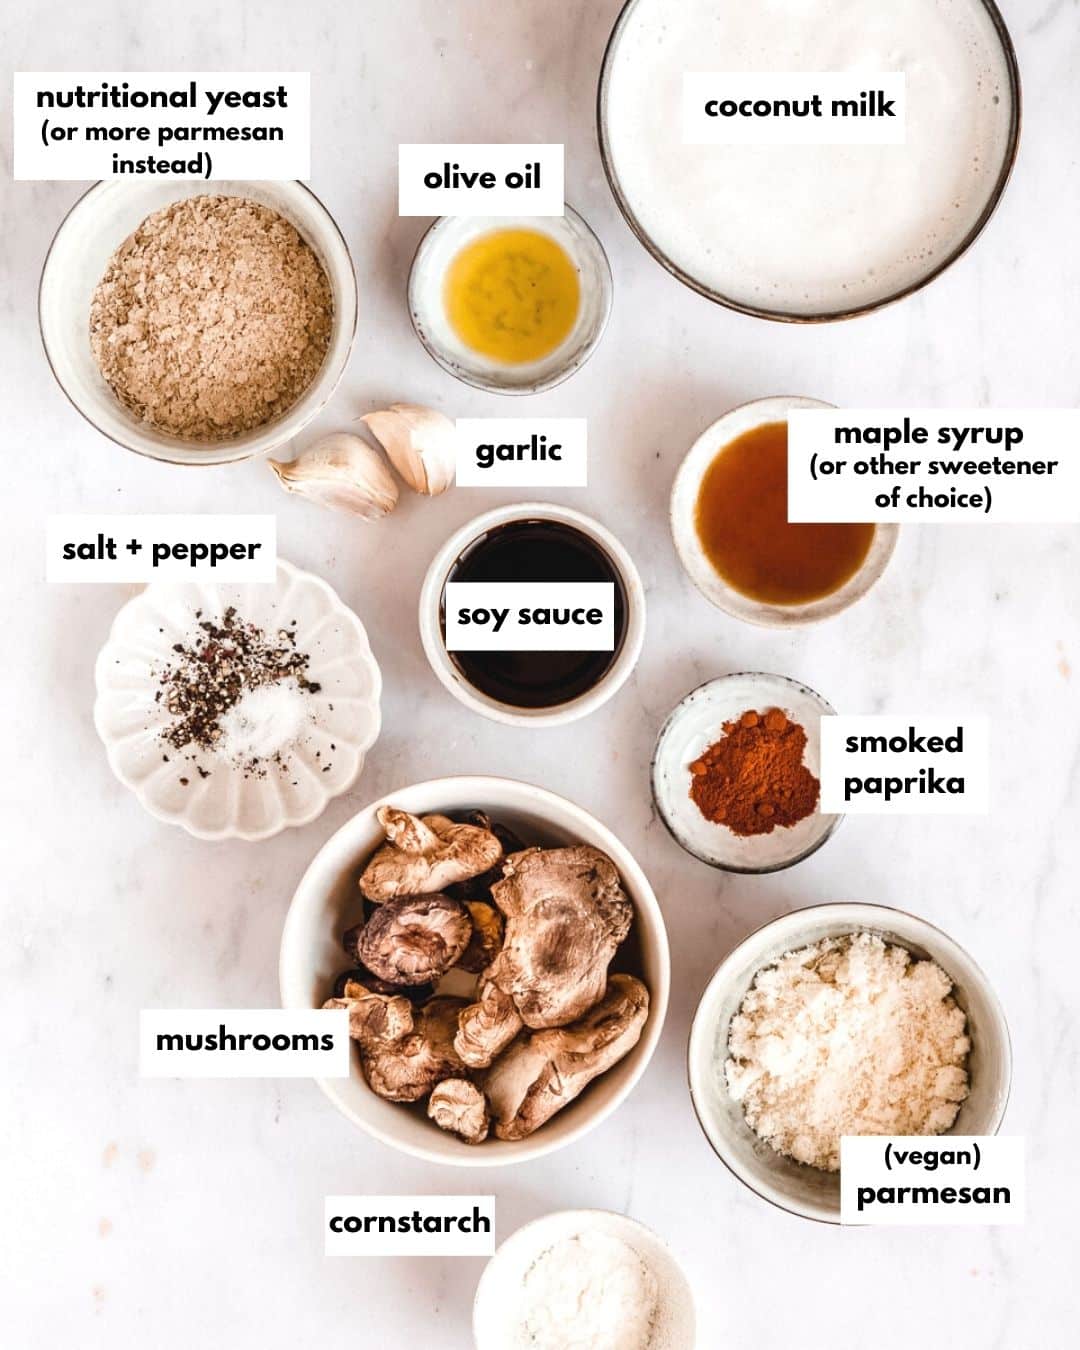 all ingrediends needed to make coconut milk pasta sauce with crispy mushrooms.